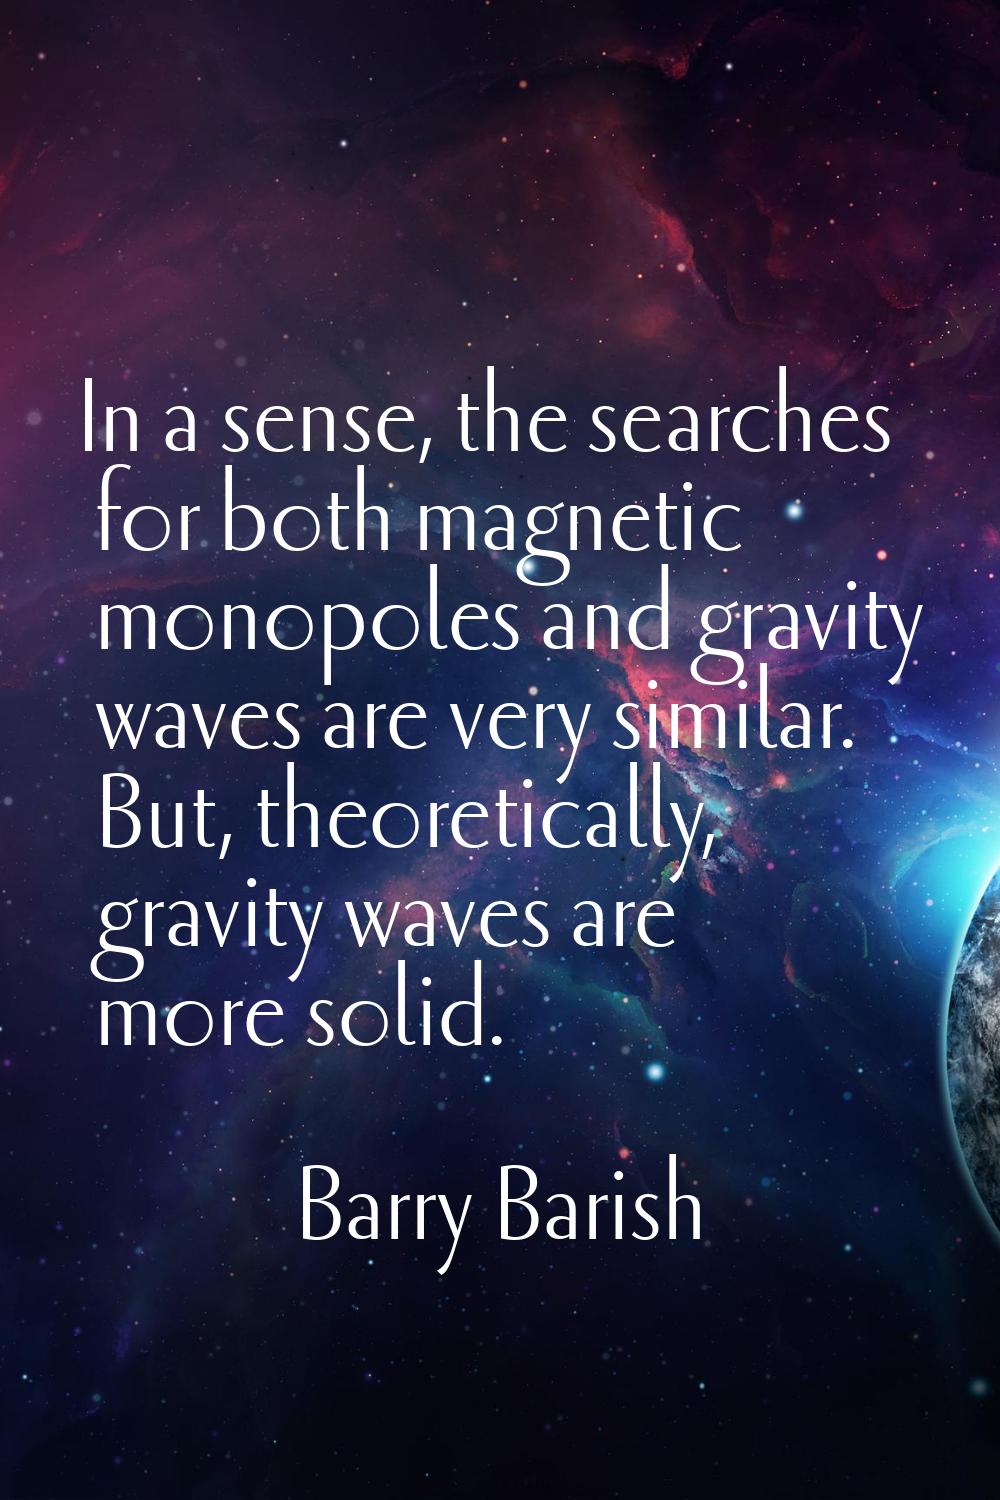 In a sense, the searches for both magnetic monopoles and gravity waves are very similar. But, theor